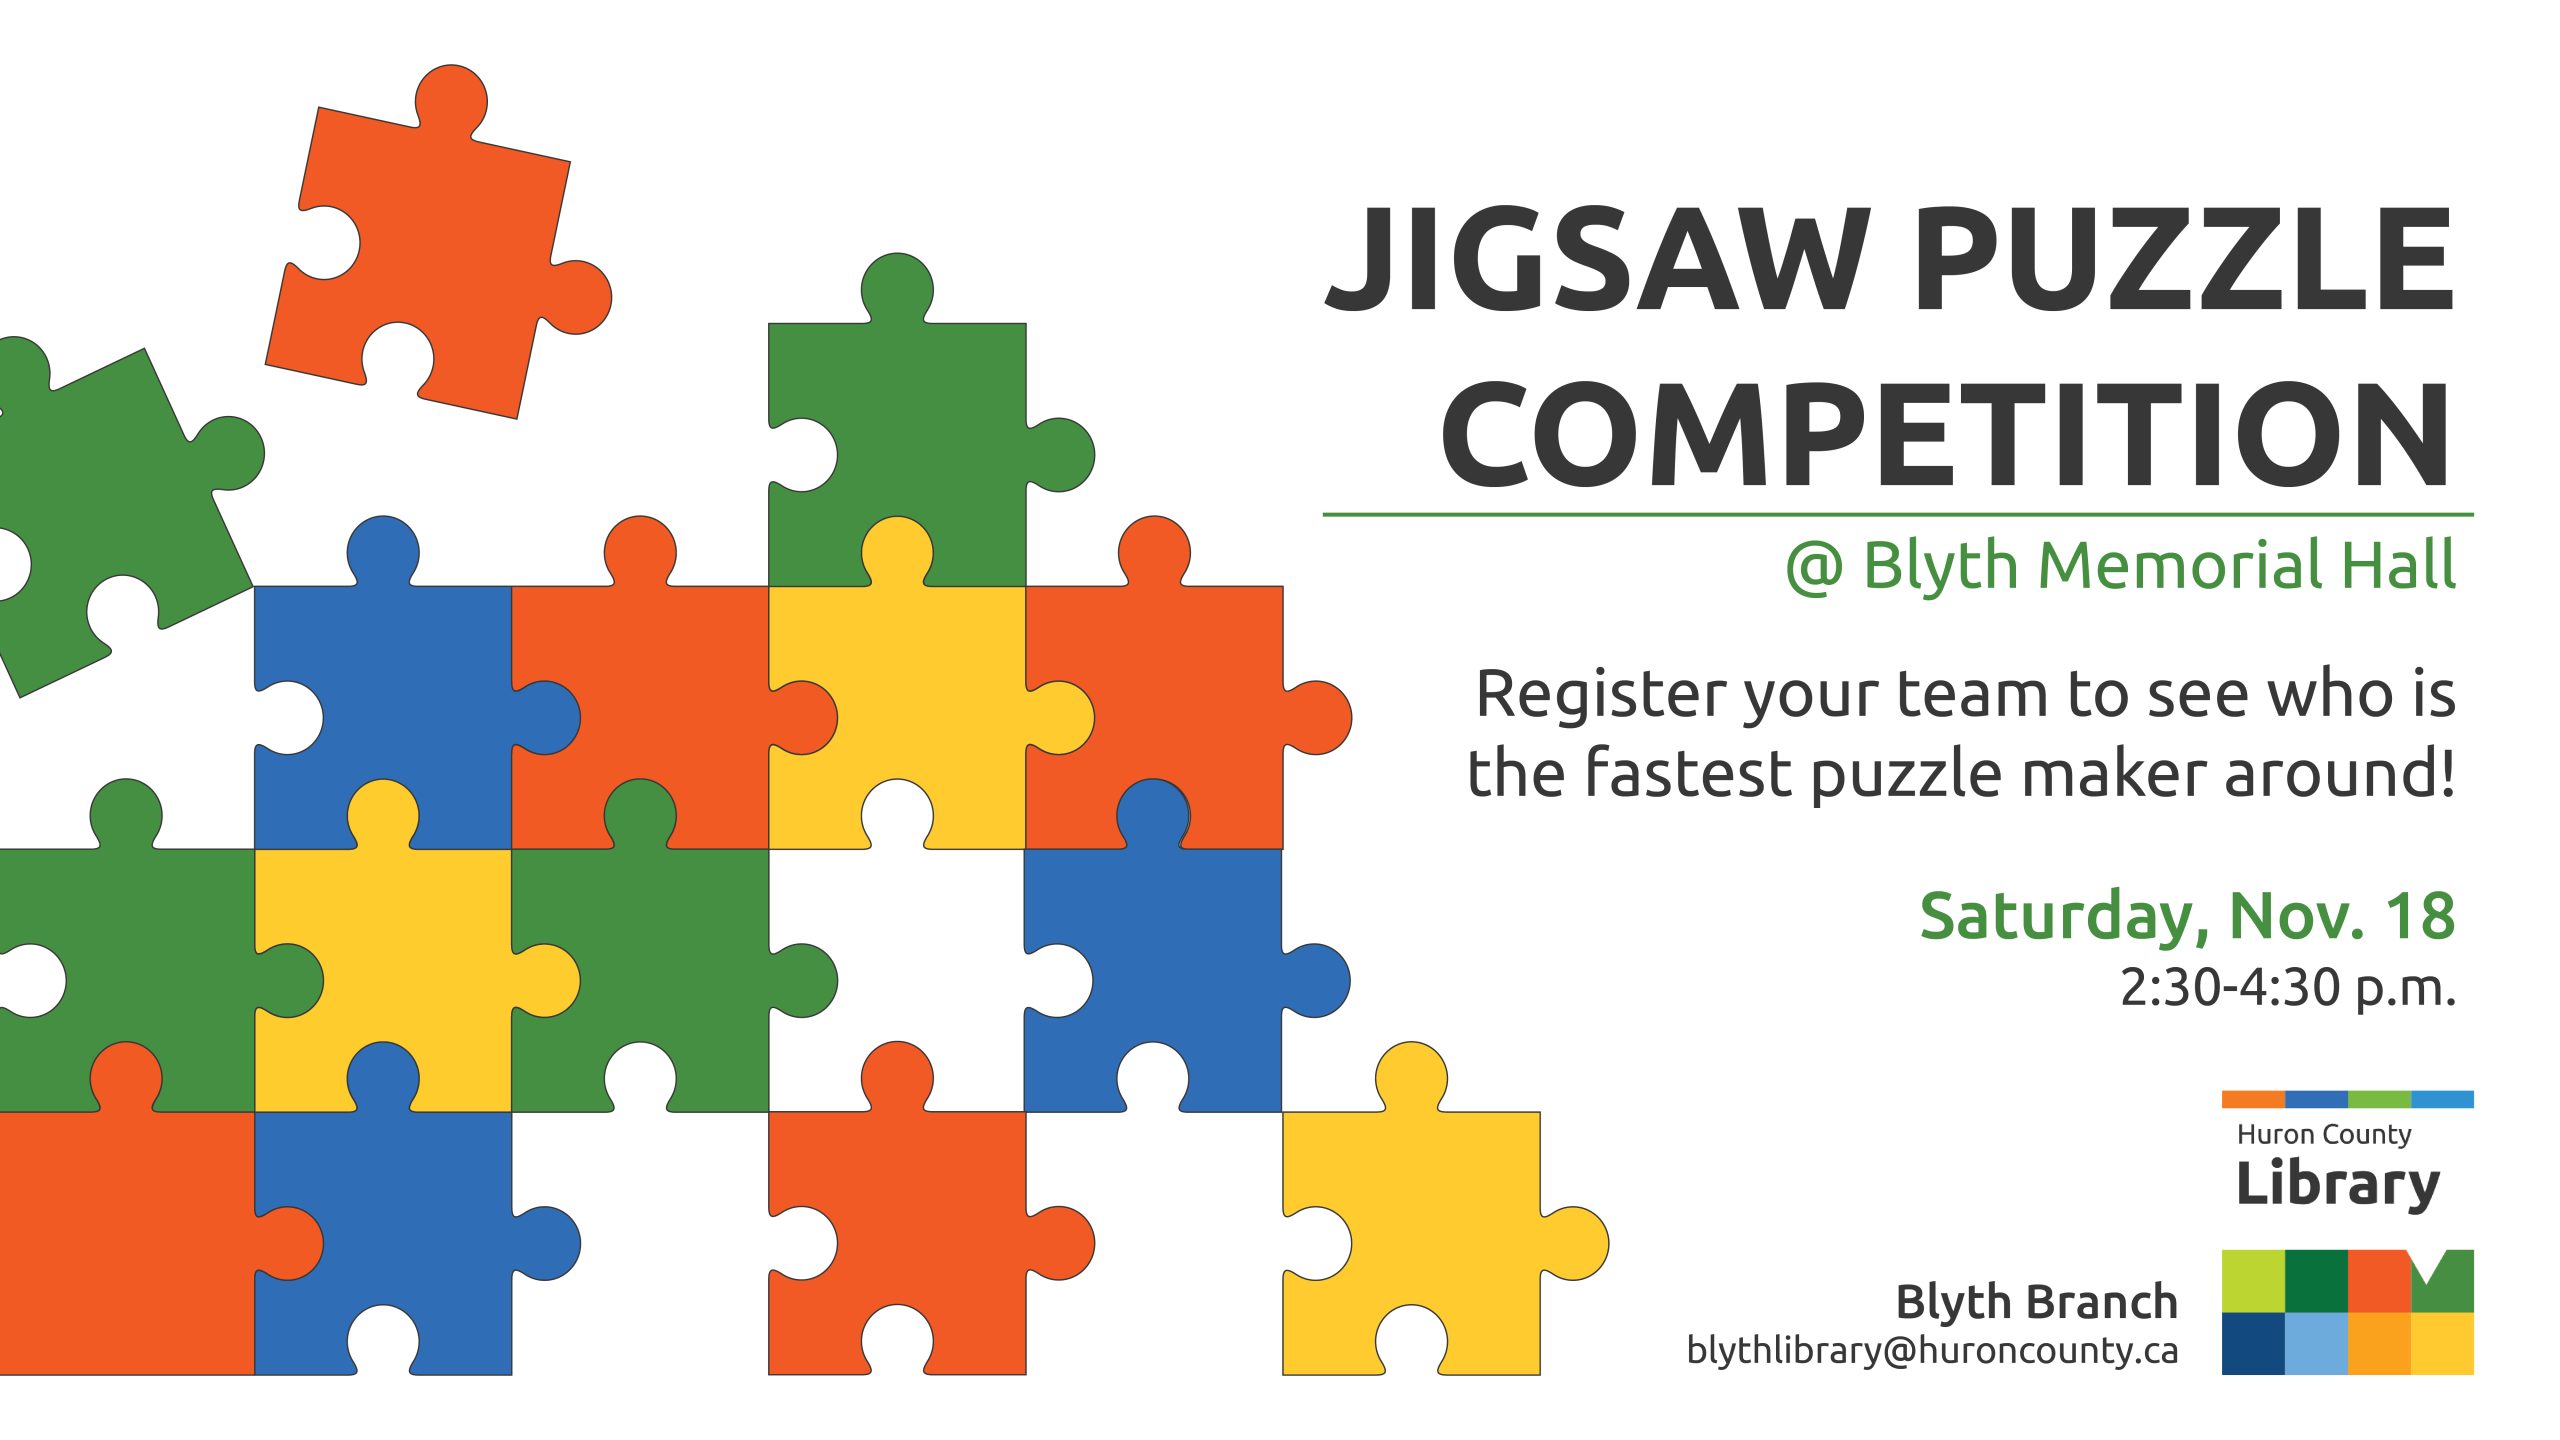 Illustration of puzzle pieces with text promoting puzzle competition in Blyth